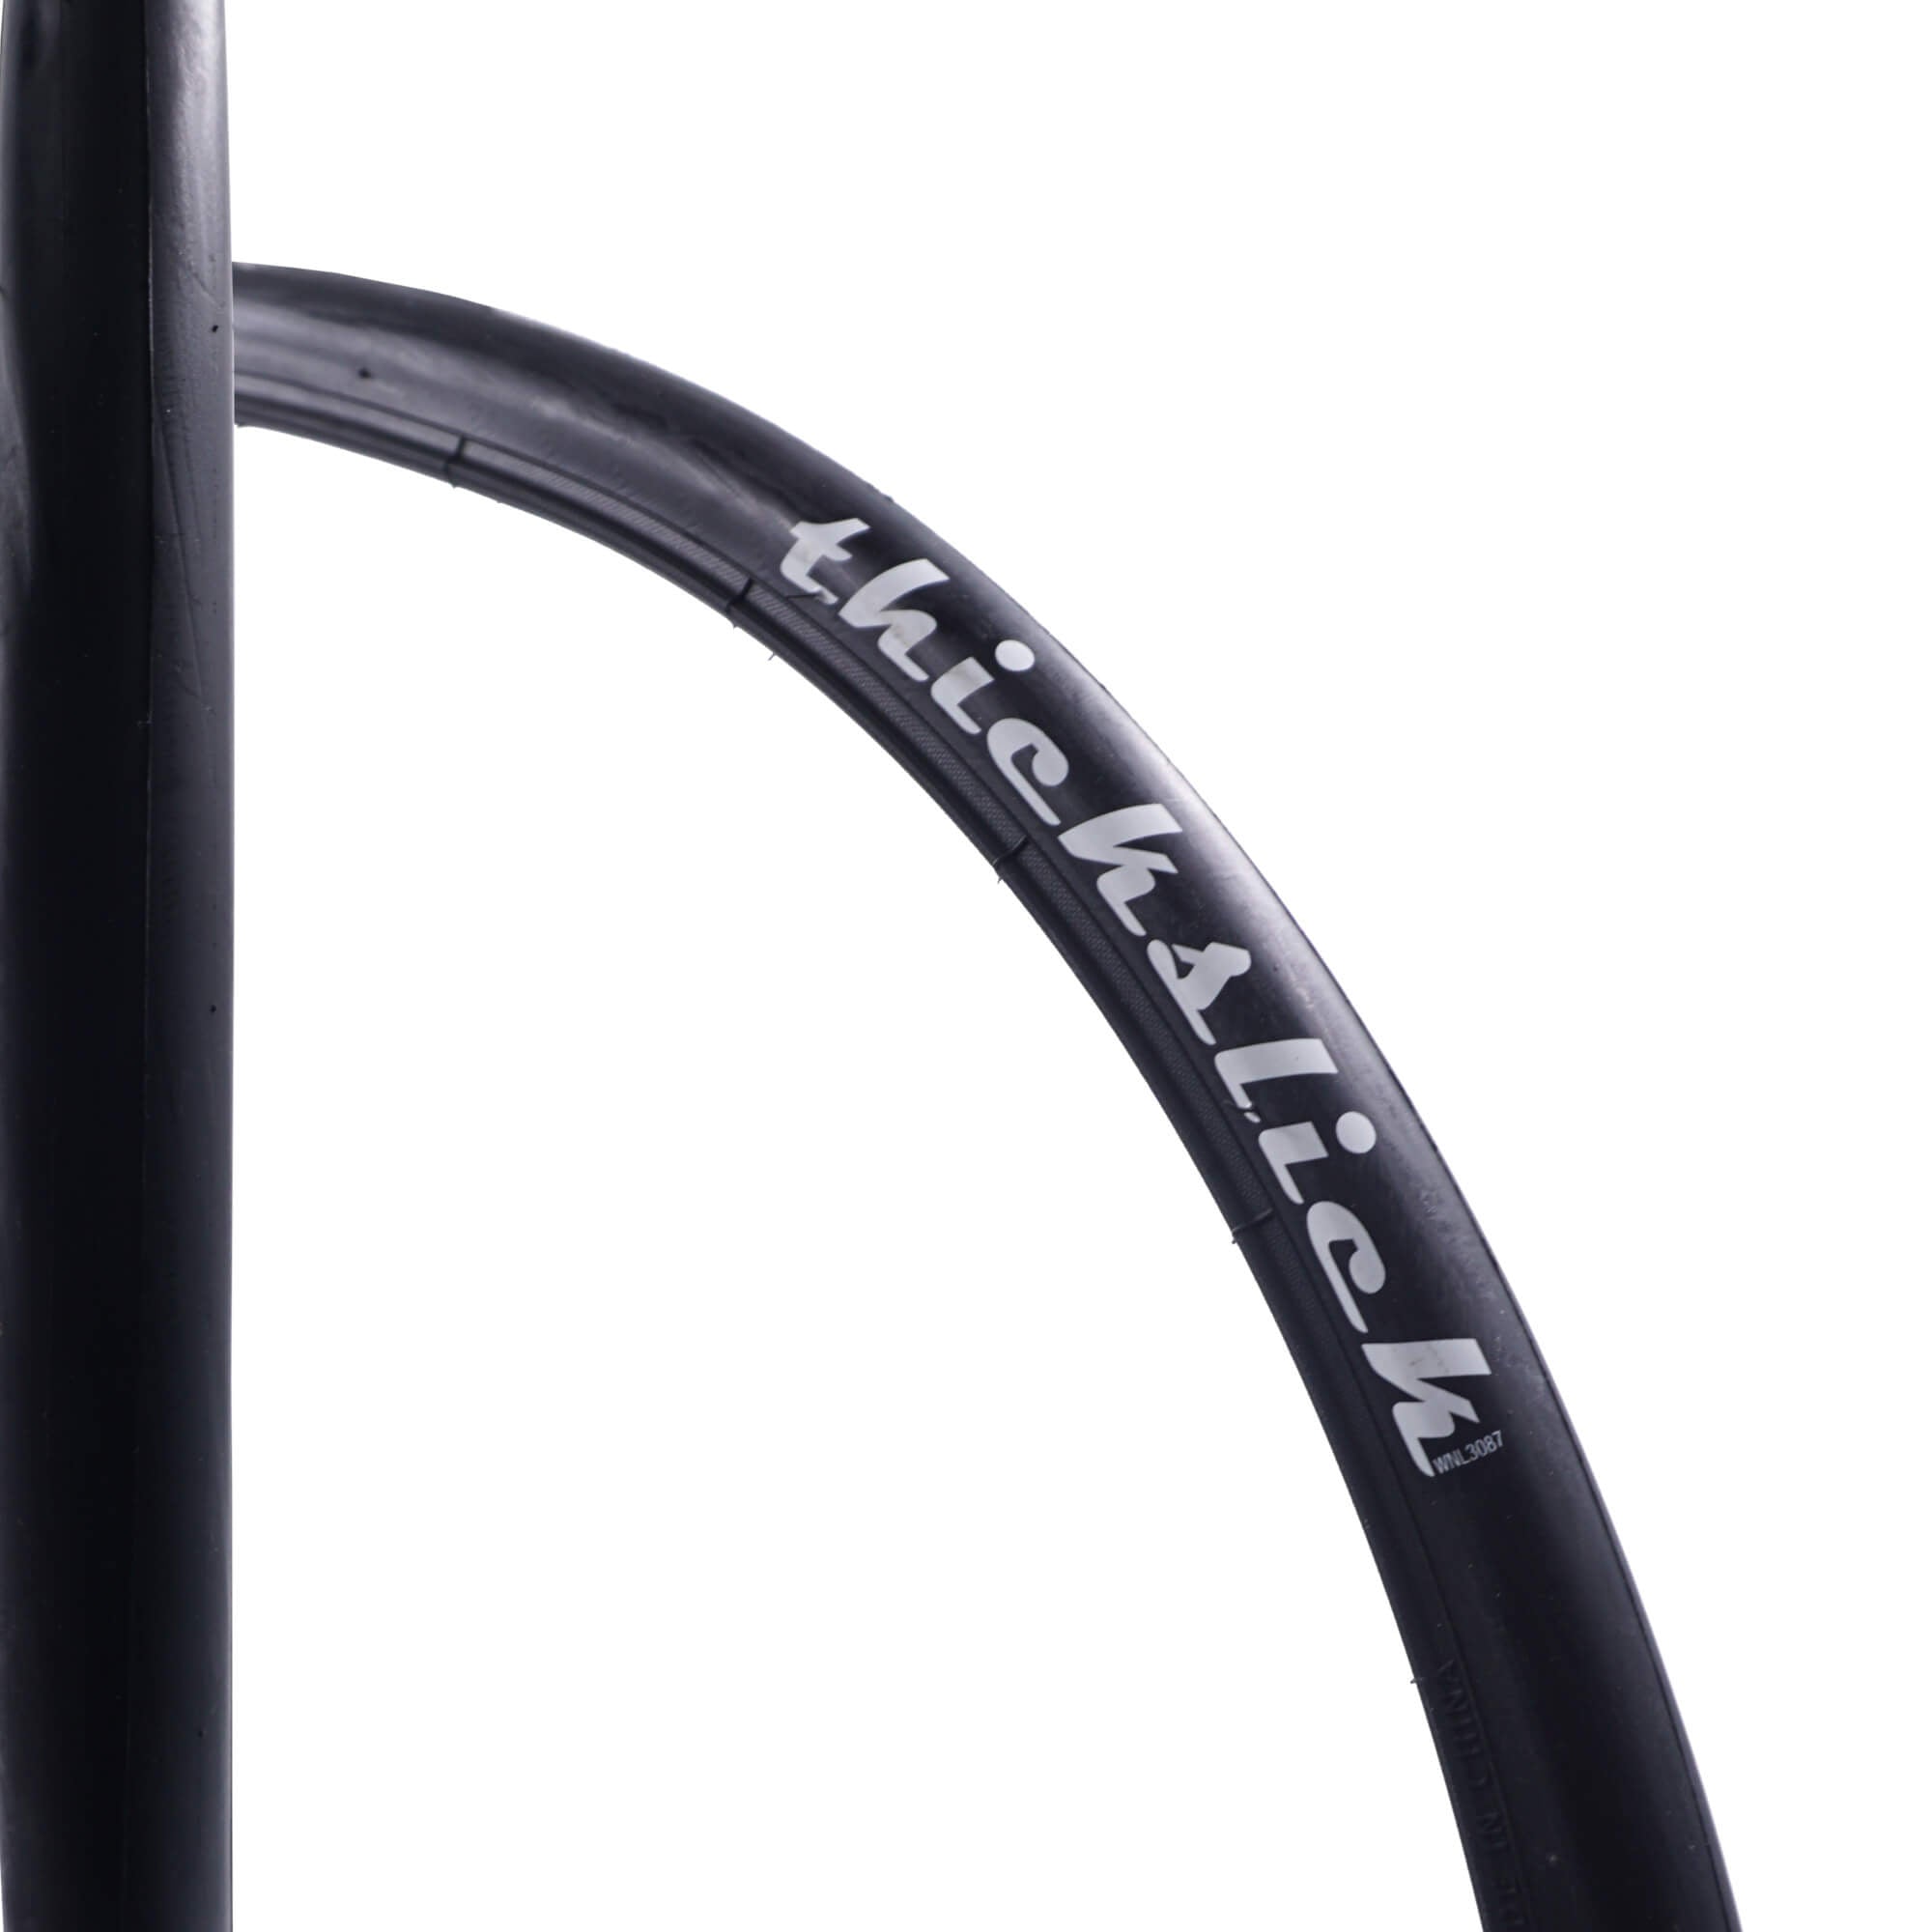 Thickslick Pure Comp 700x23 Wire Bead Road Urban Tire - The Bikesmiths